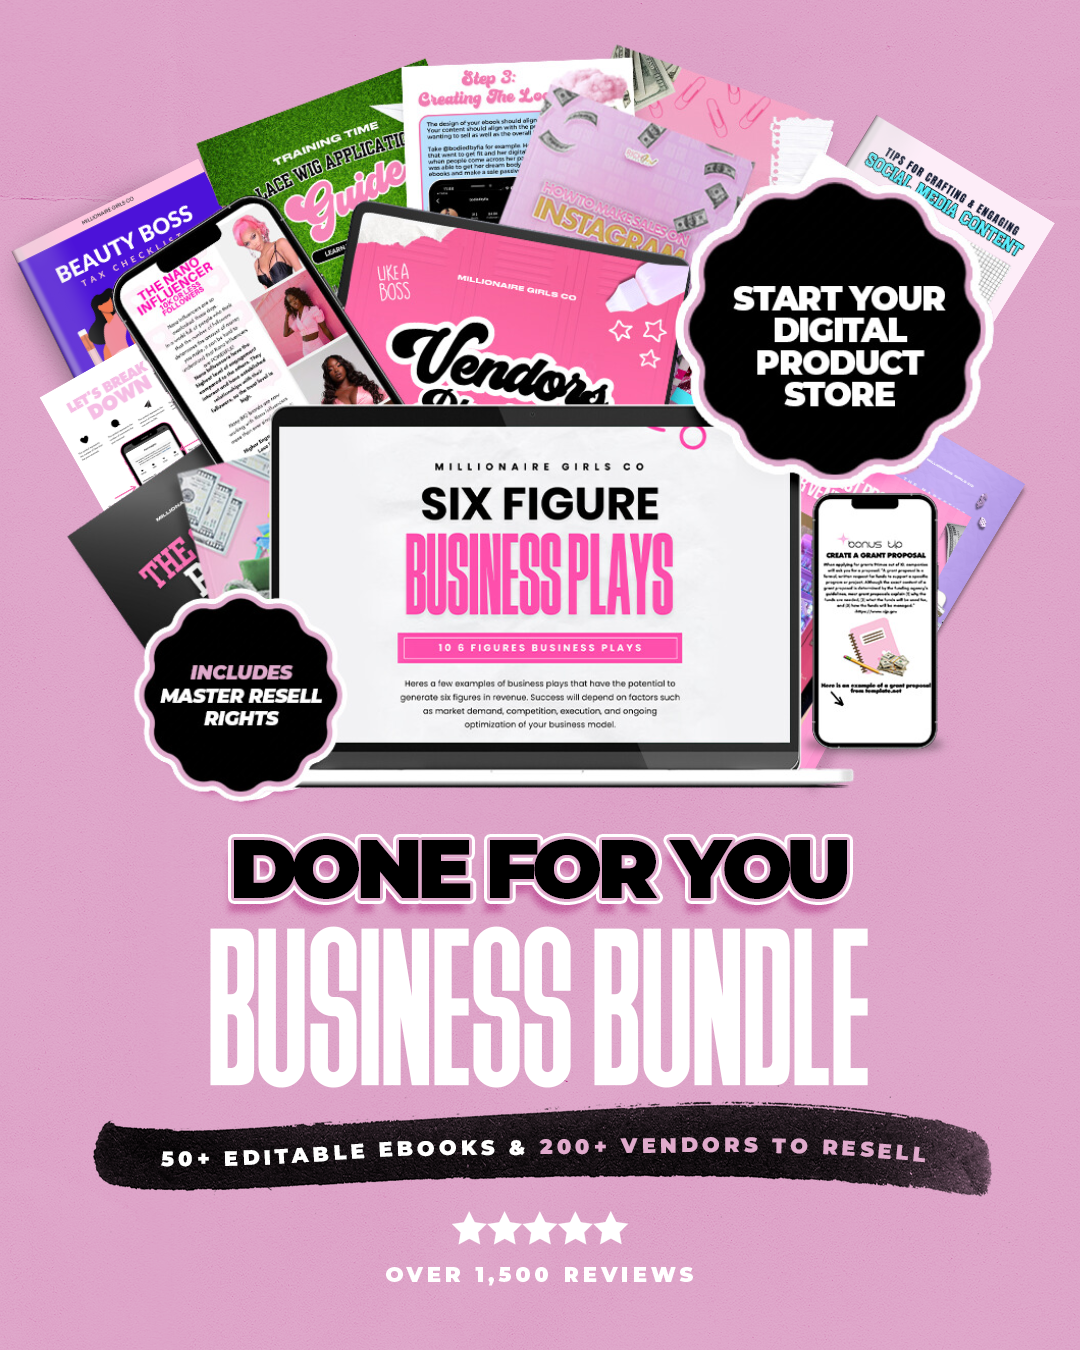 Done For You Business Bundle - MGC